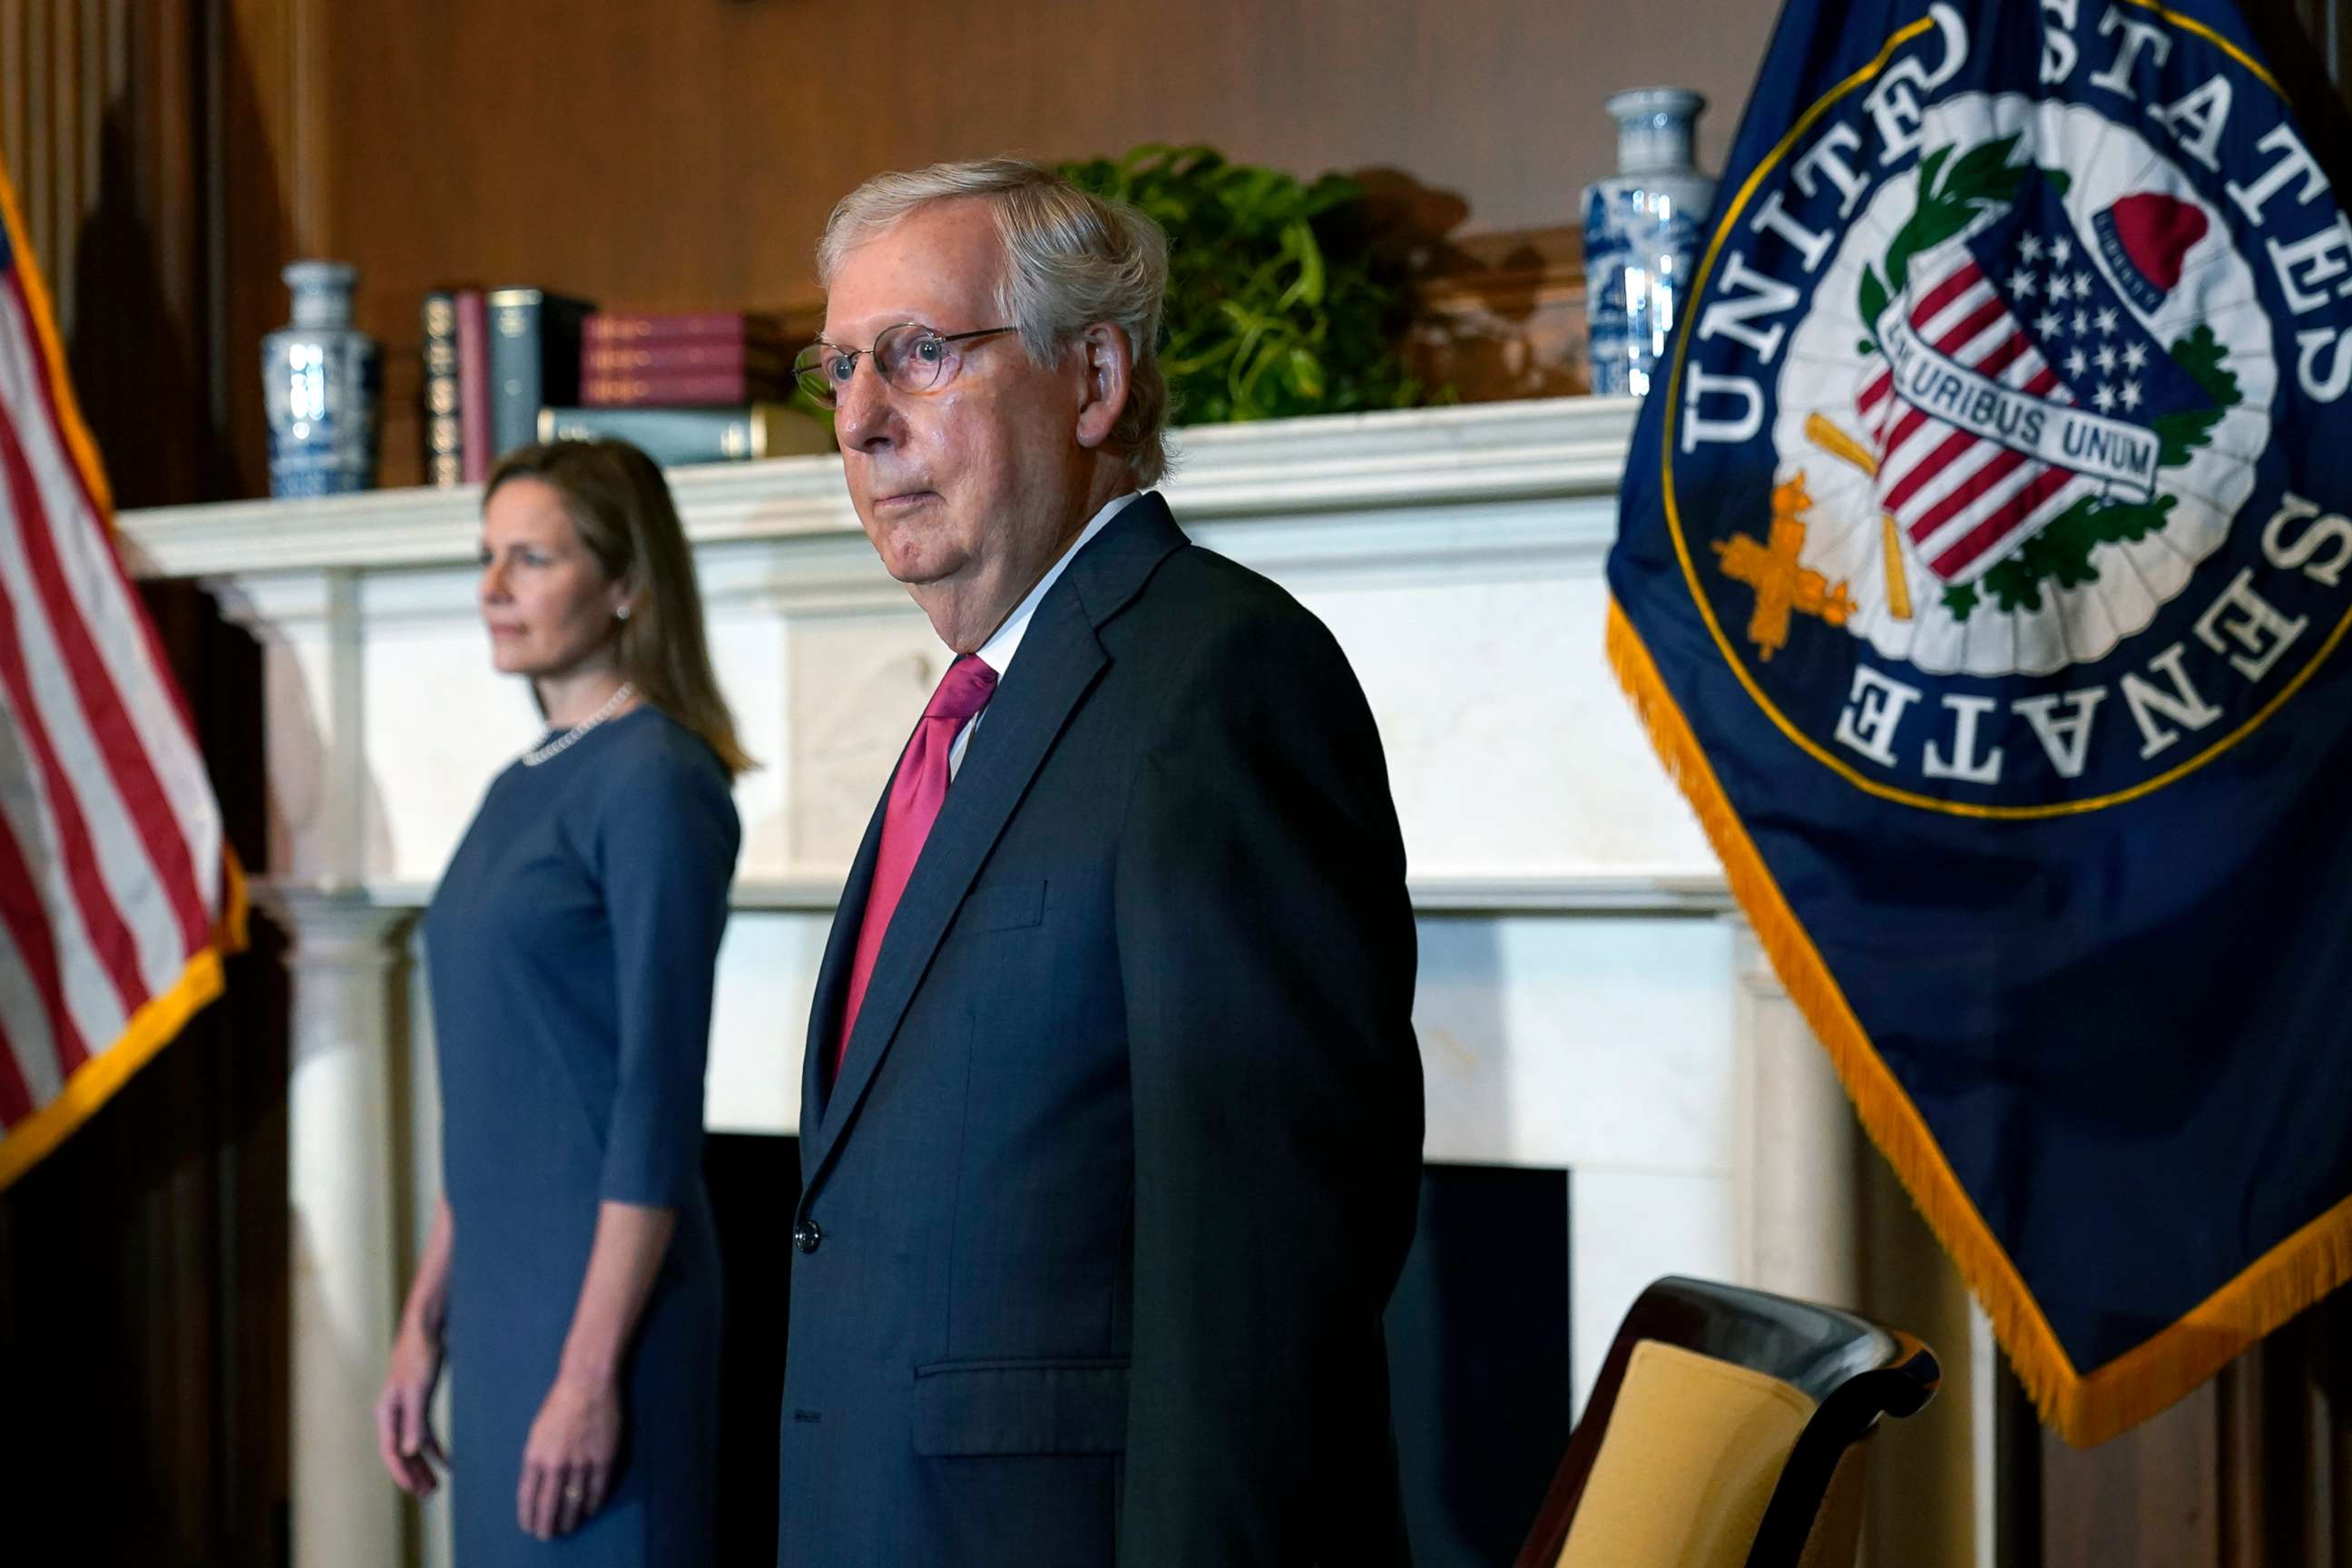 PHOTO: Senate Majority Leader Mitch McConnell (R-KY) meets with Seventh U.S. Circuit Court Judge Amy Coney Barrett (L), President Donald Trump's nominee for the Supreme Court, on Capitol Hill, Sept. 29, 2020.